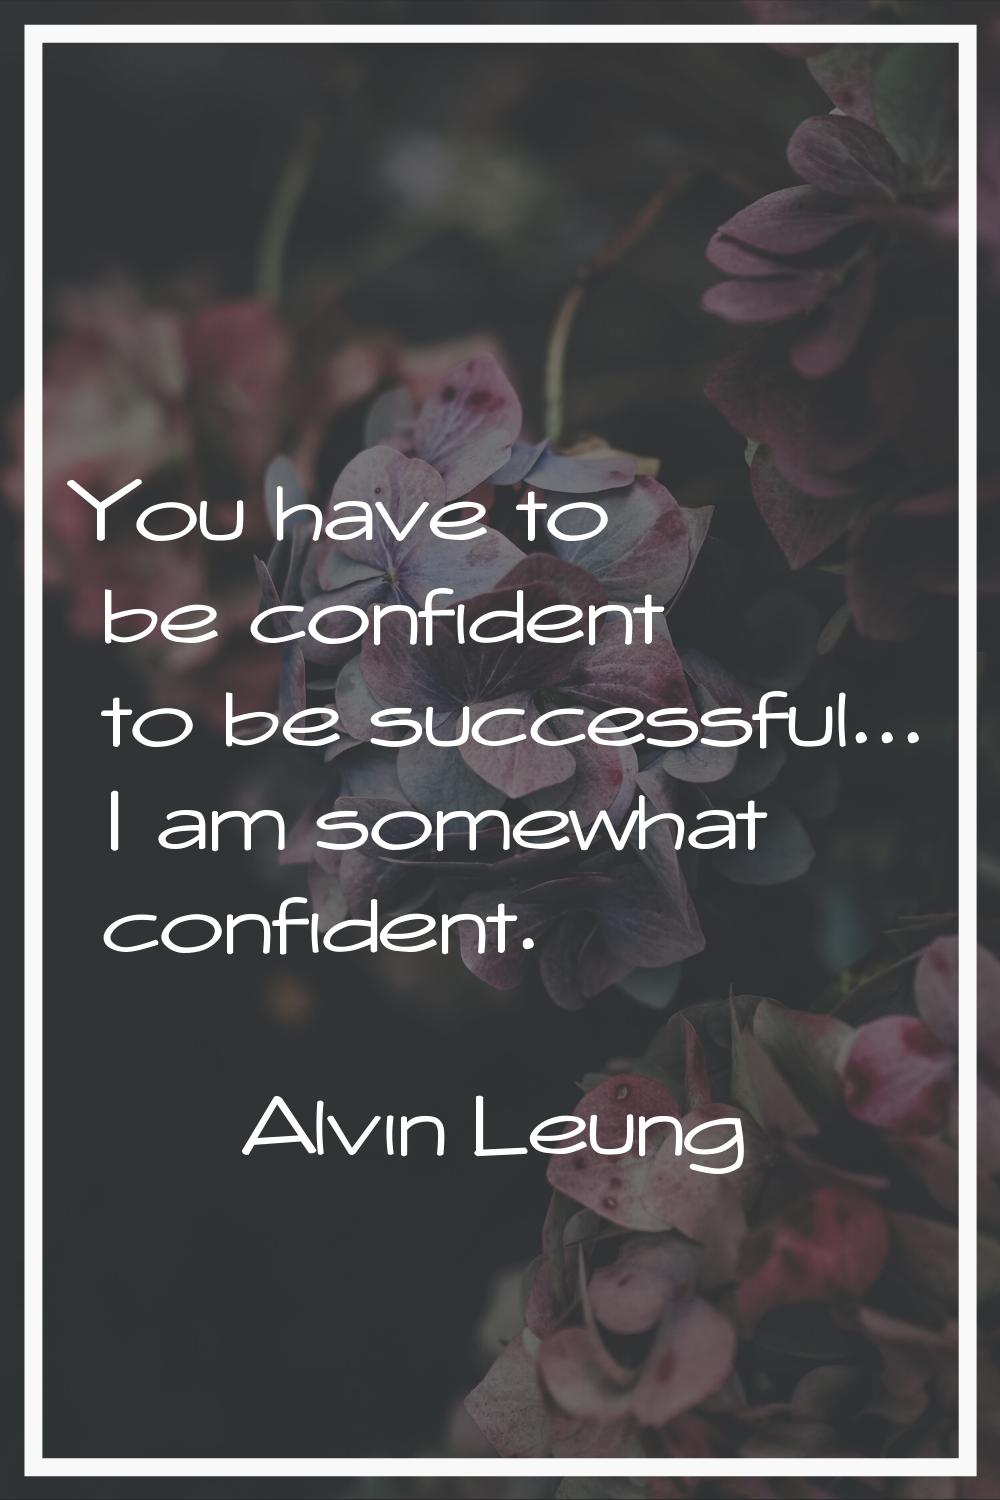 You have to be confident to be successful... I am somewhat confident.